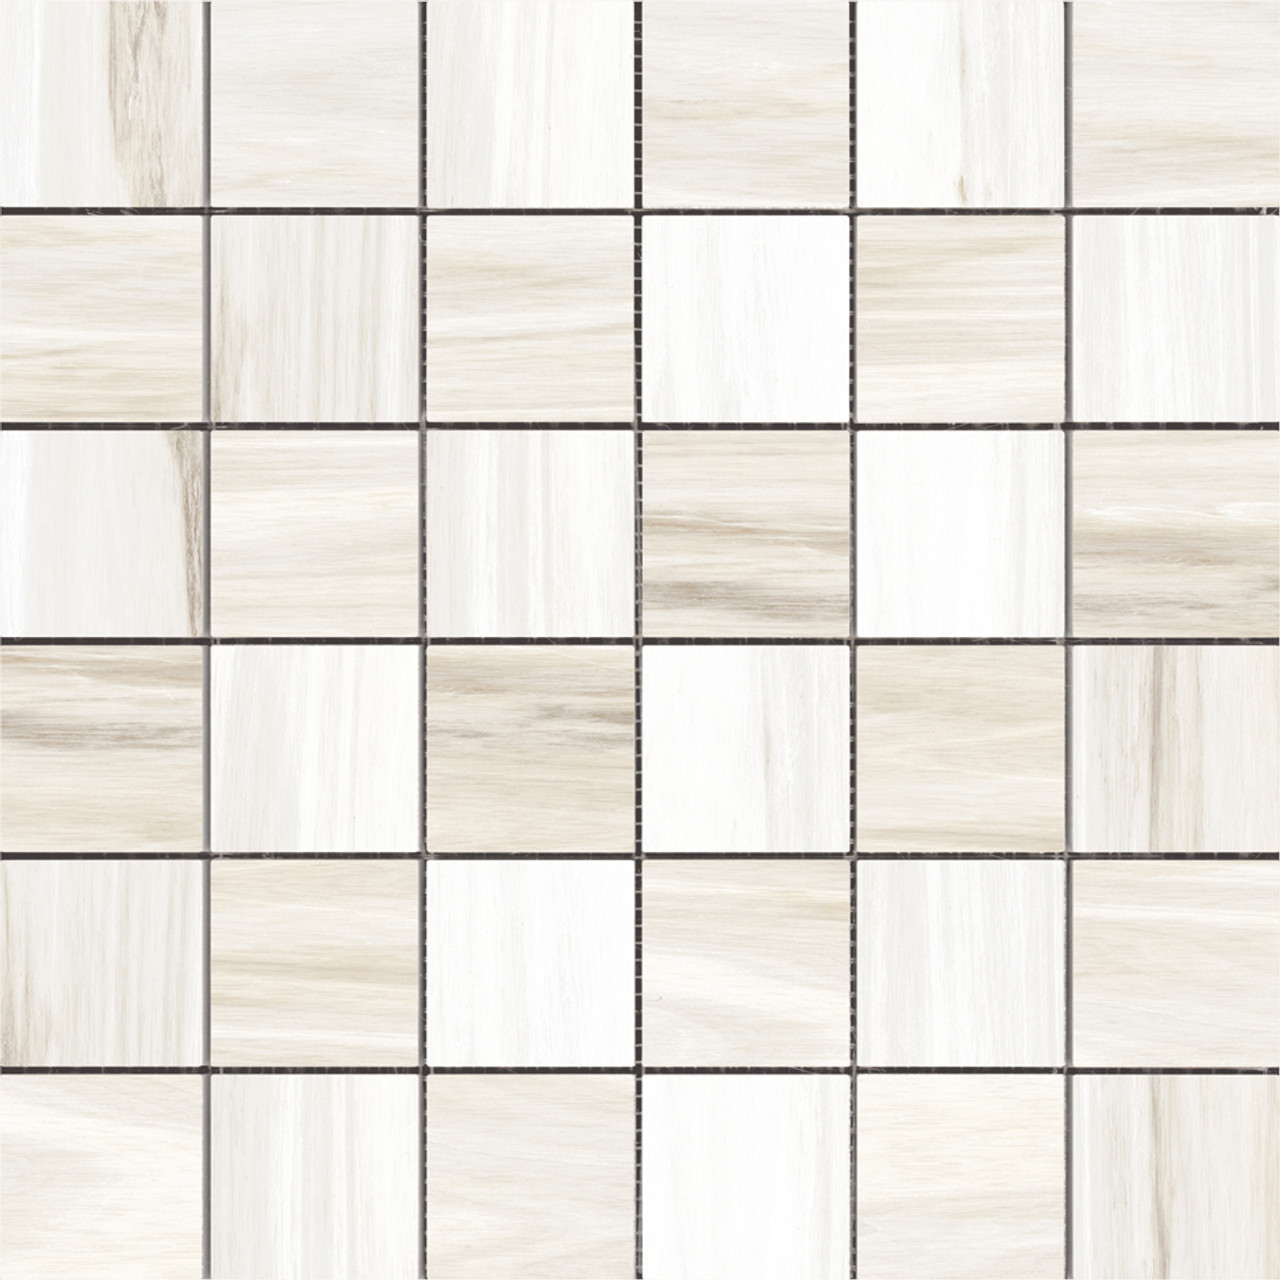 Ontario Greige 2x2 Mosaic - Tiles Direct Store